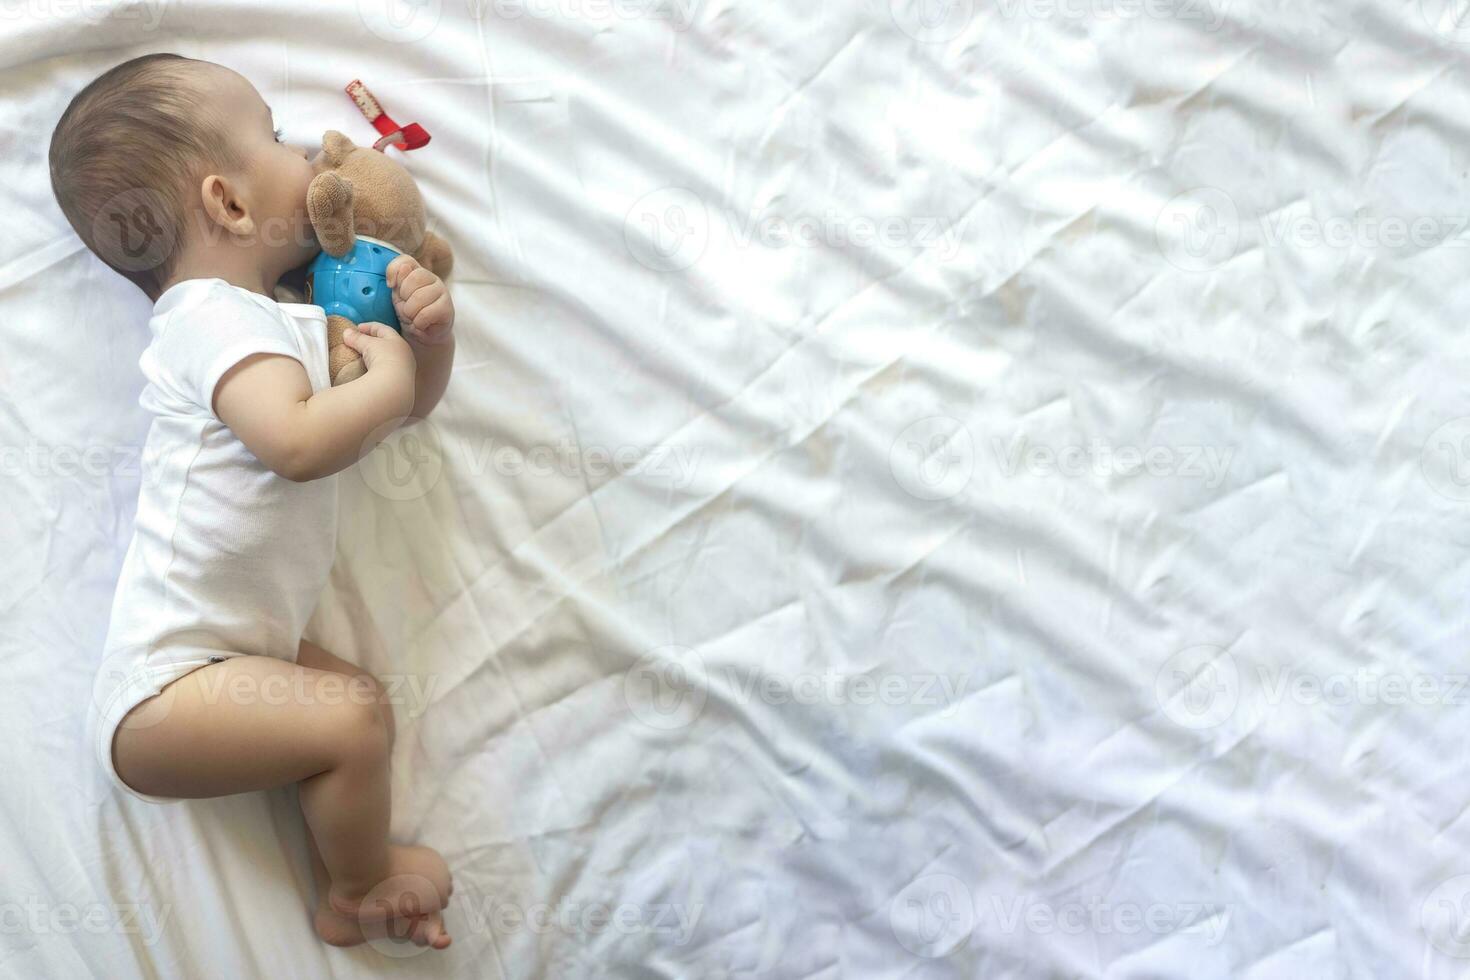 6-8-month-old baby boy lying playfully in bed. Charming 6-7 month little baby in white bodysuit. Baby boy in white bedding. Copy space photo